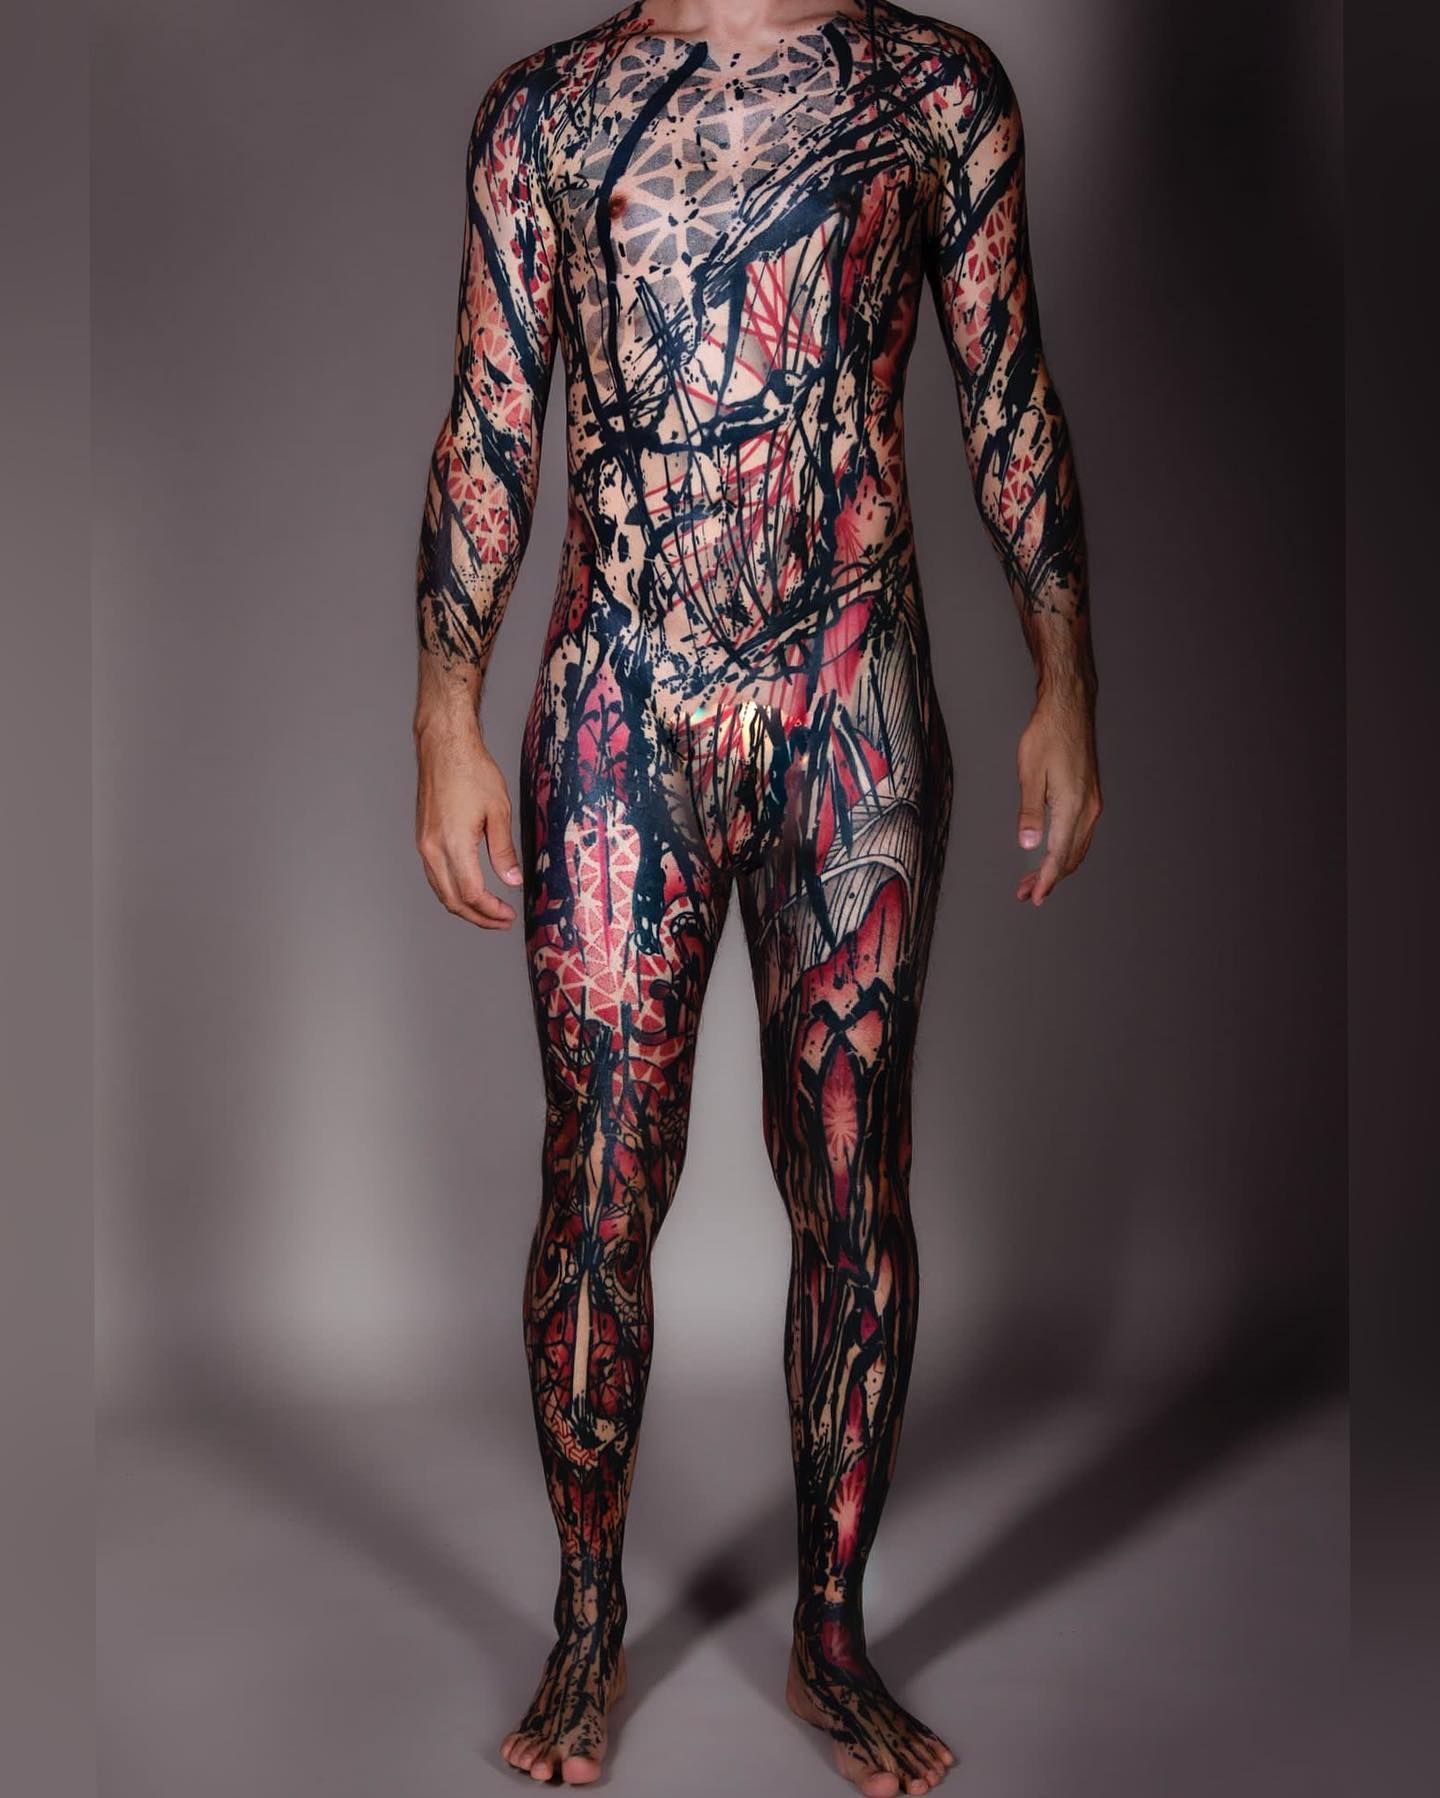 Japanese Body Suit Tattoo – Red Rocket Tattoo